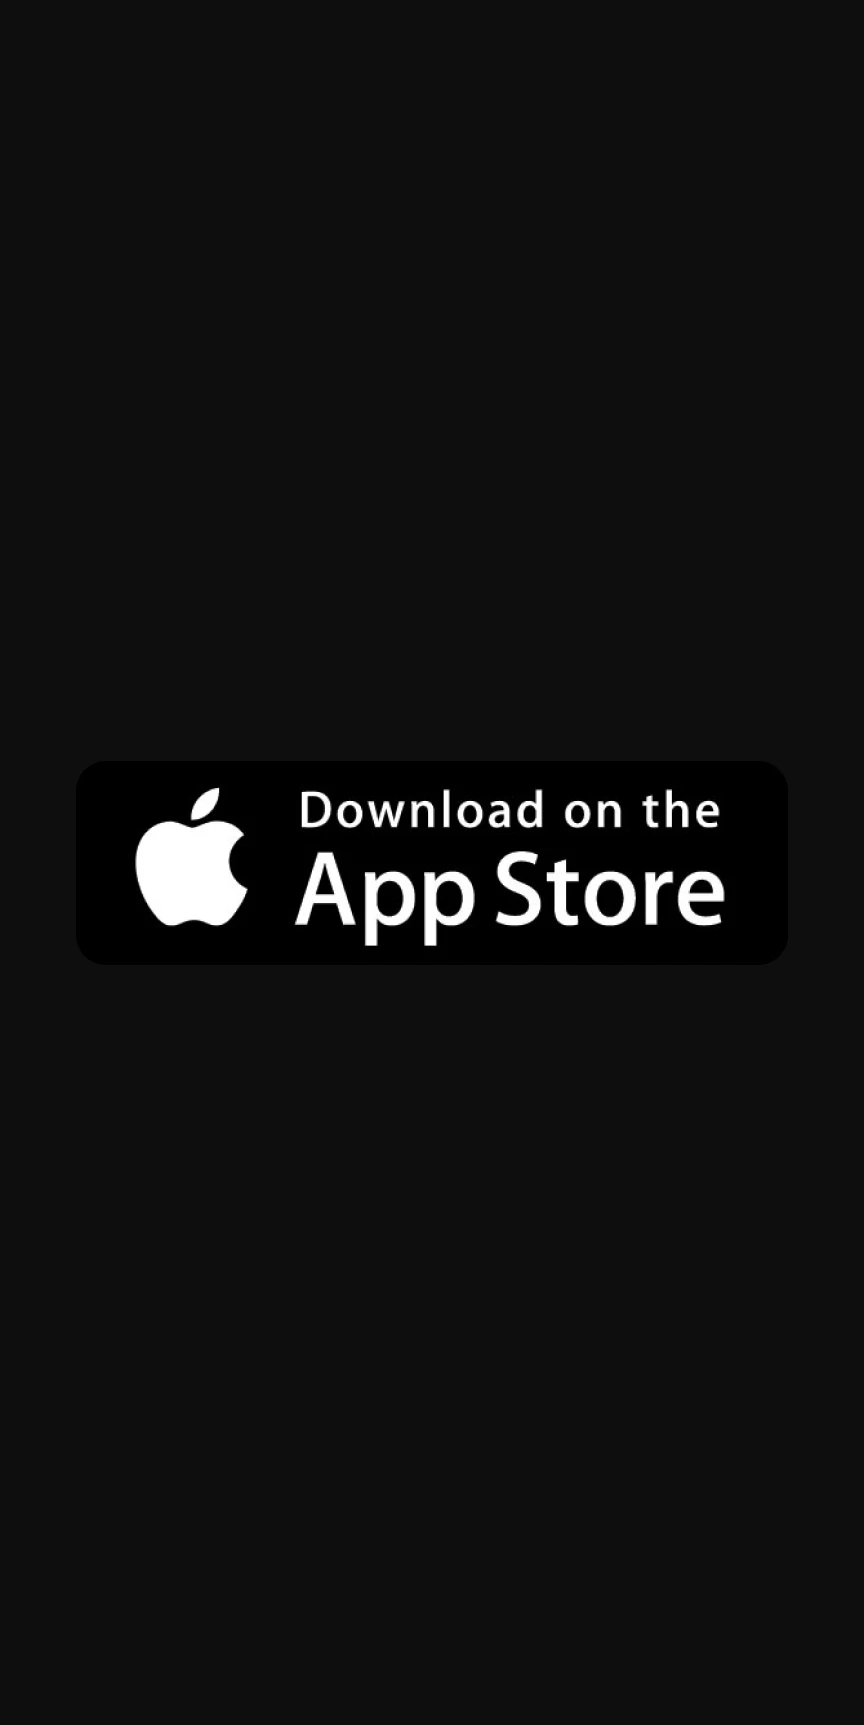 To download the app on iOS, you can visit the App Store.